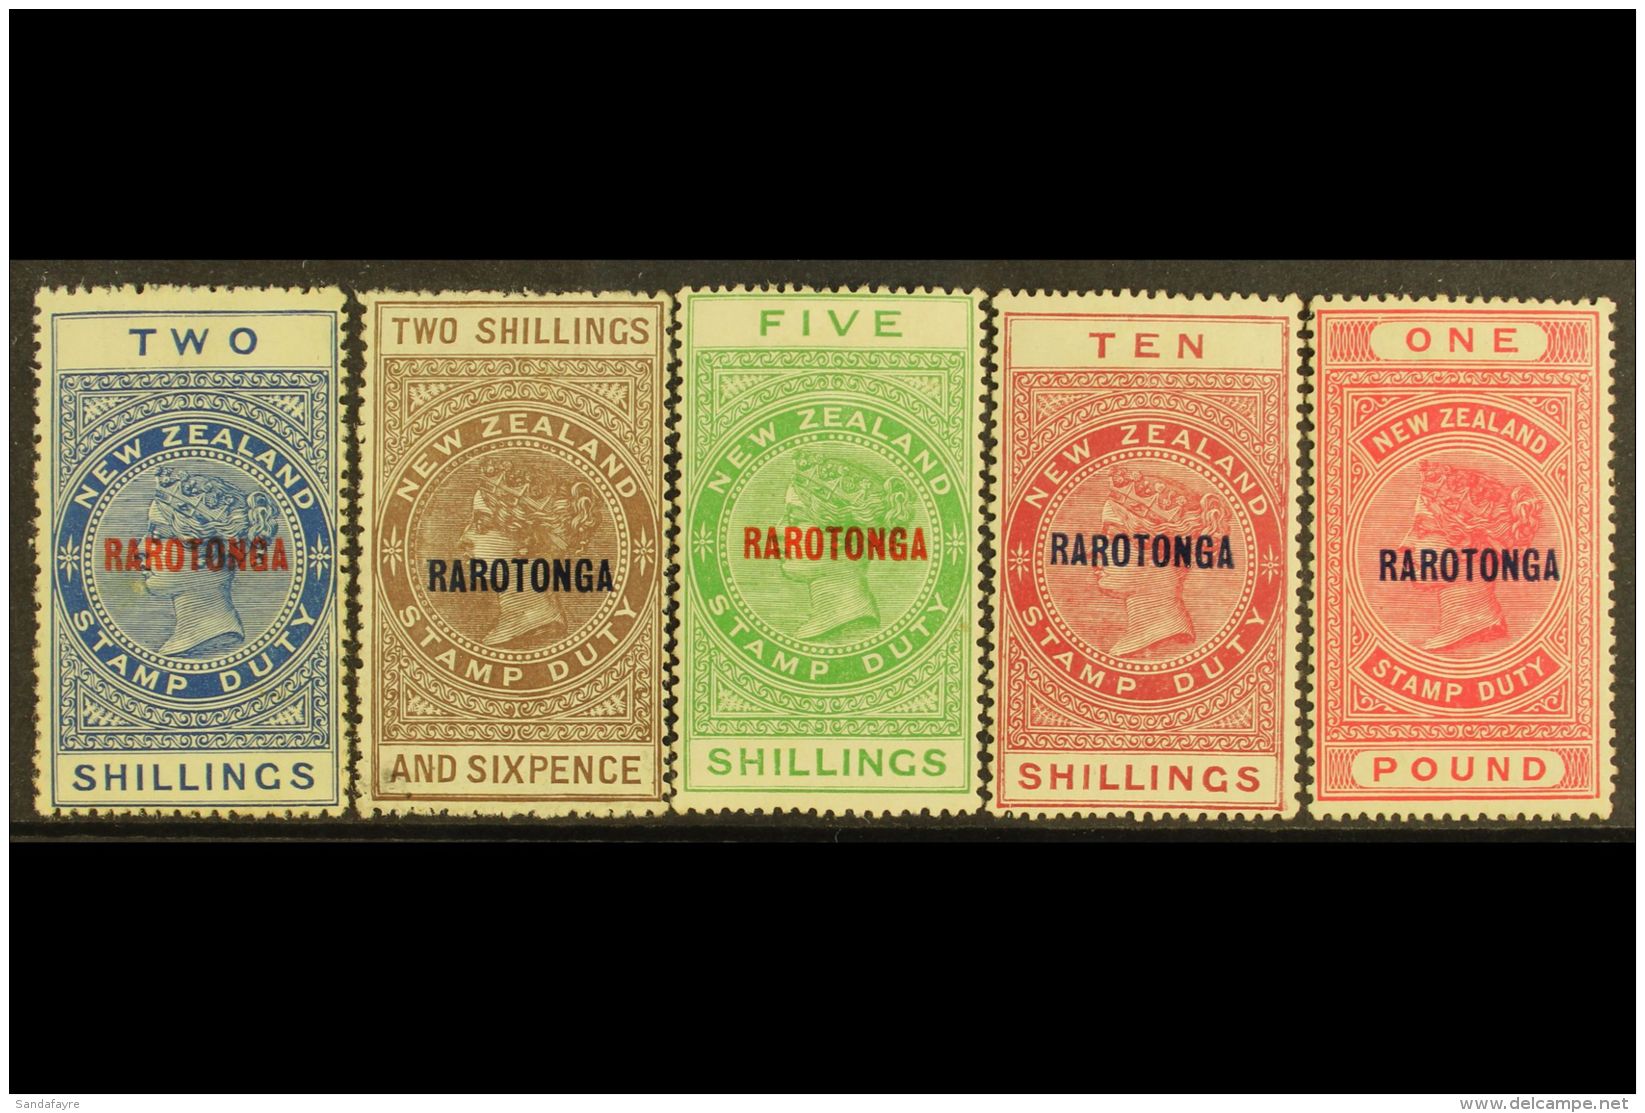 POSTAL FISCALS 1921-23 Complete "RAROTONGA" Opt'd Set, SG 76/80, Some Light Gum Tone On 2s, Otherwise Fine Mint... - Cook